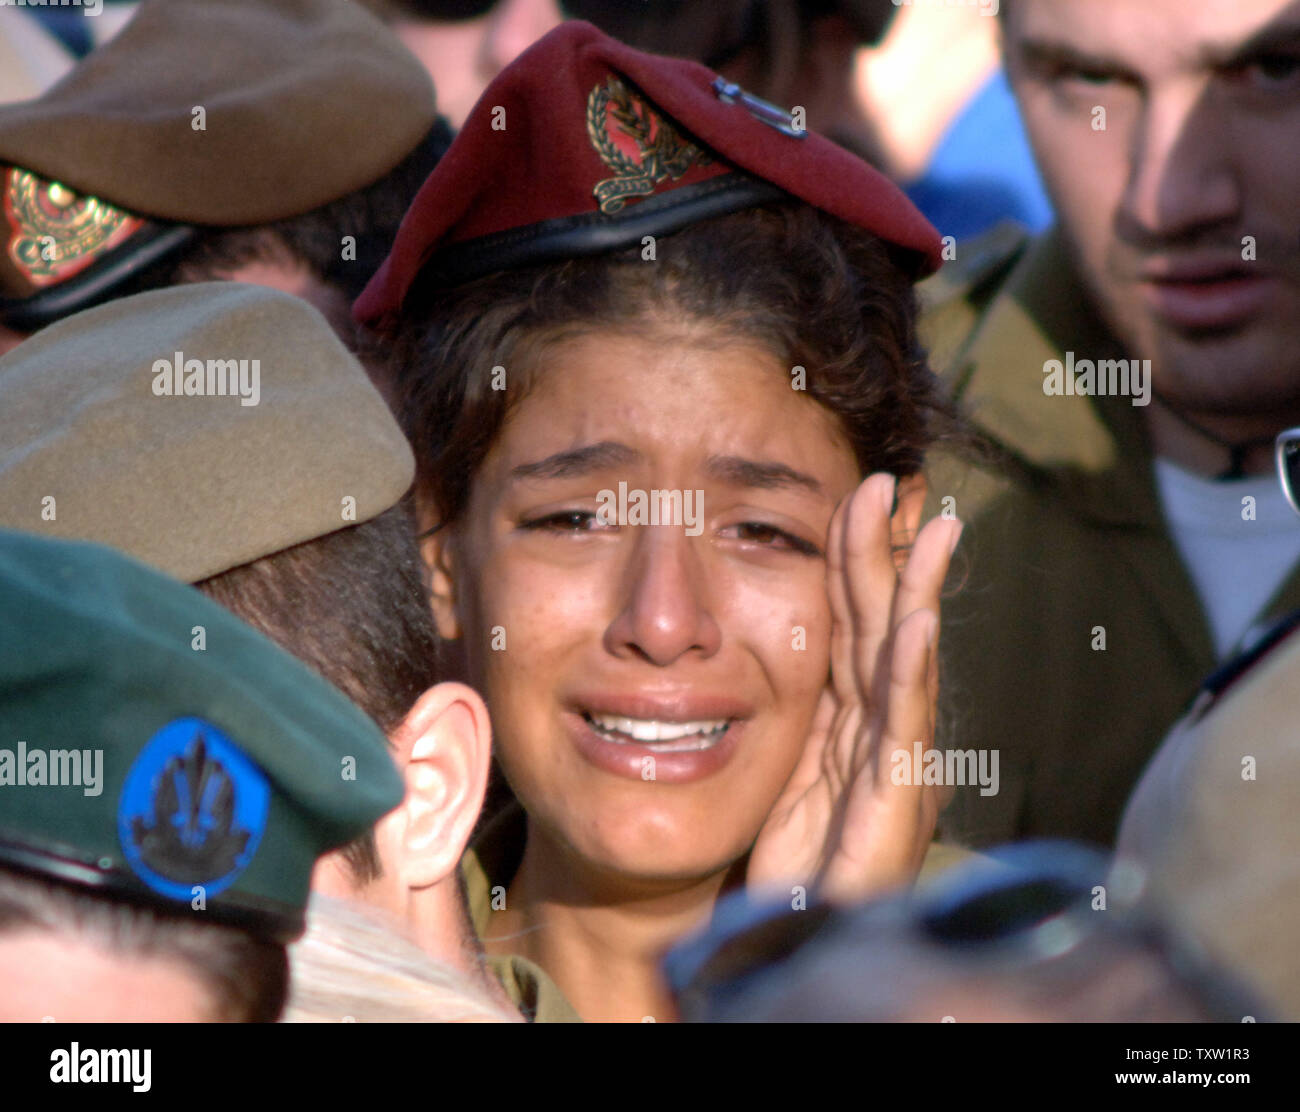 An Israeli soldier cries during the funeral of her comrade Nimrod Cohen in the military section of the Mt. Herzl cemetery on July 13, 2006 in Jerusalem. Cohen was one of the Israeli soldiers killed by Hezbollah gunmen on July 12, 2006.  (UPI Photo/Joerg Waizmann) Stock Photo